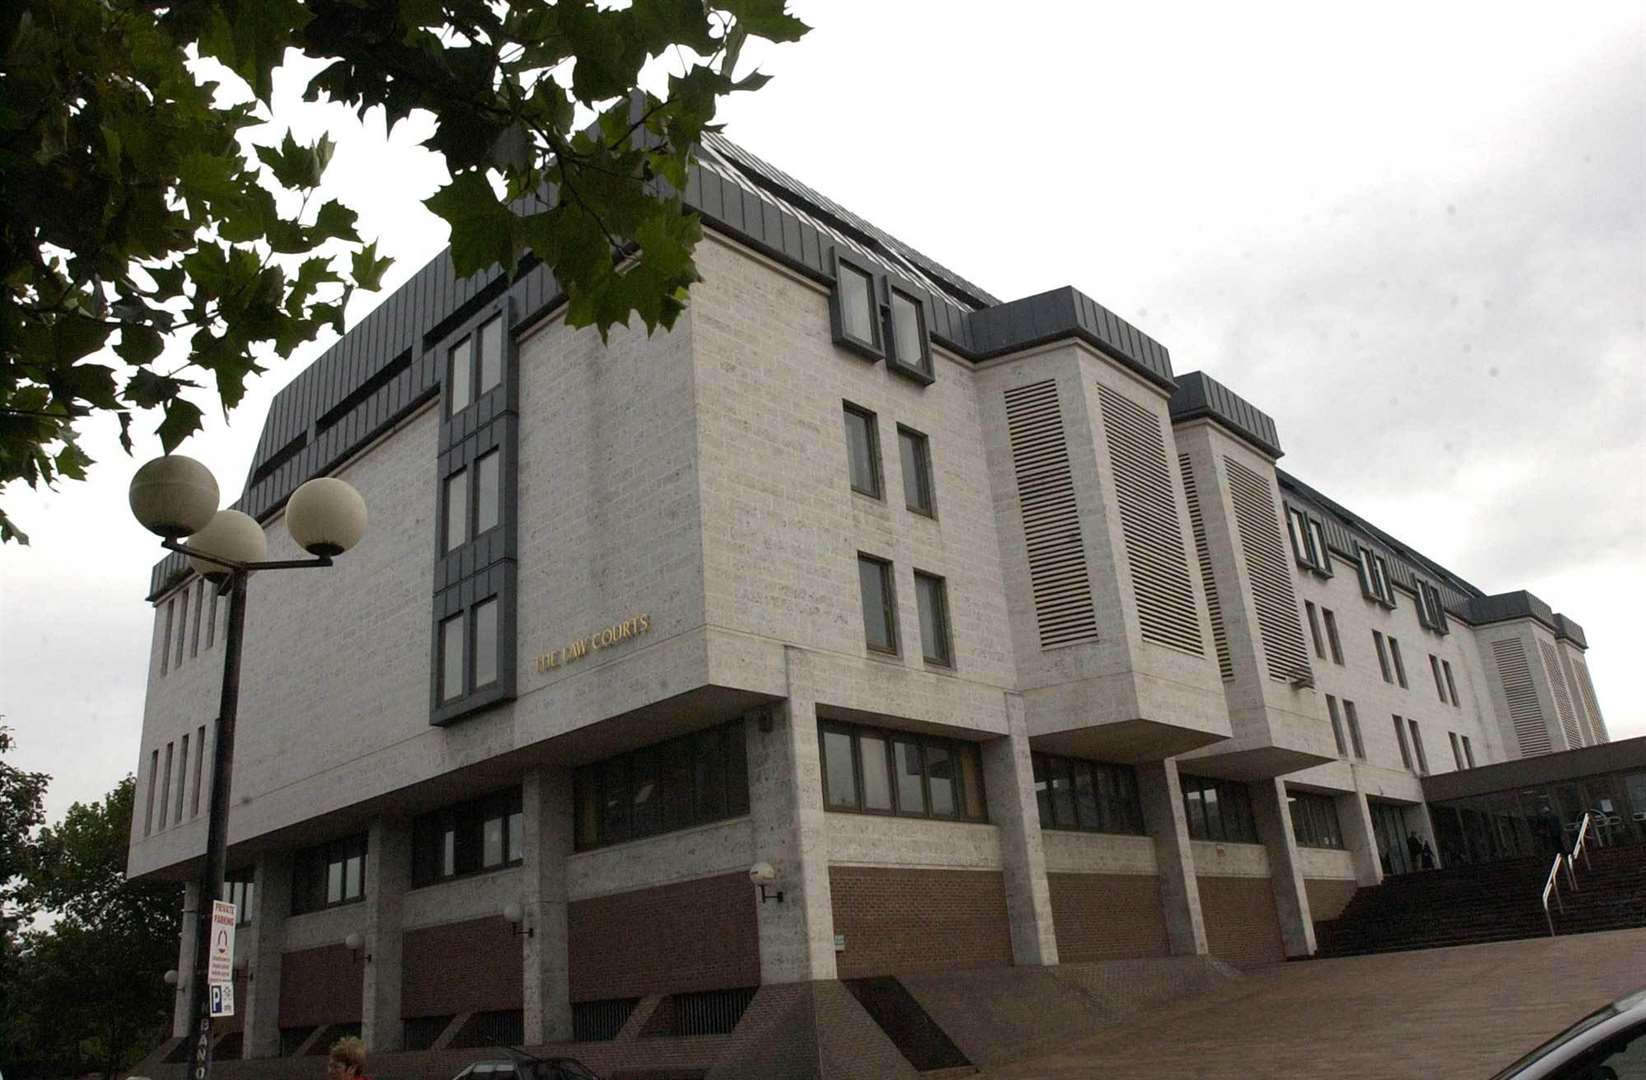 The brothers appeared at Maidstone Crown Court